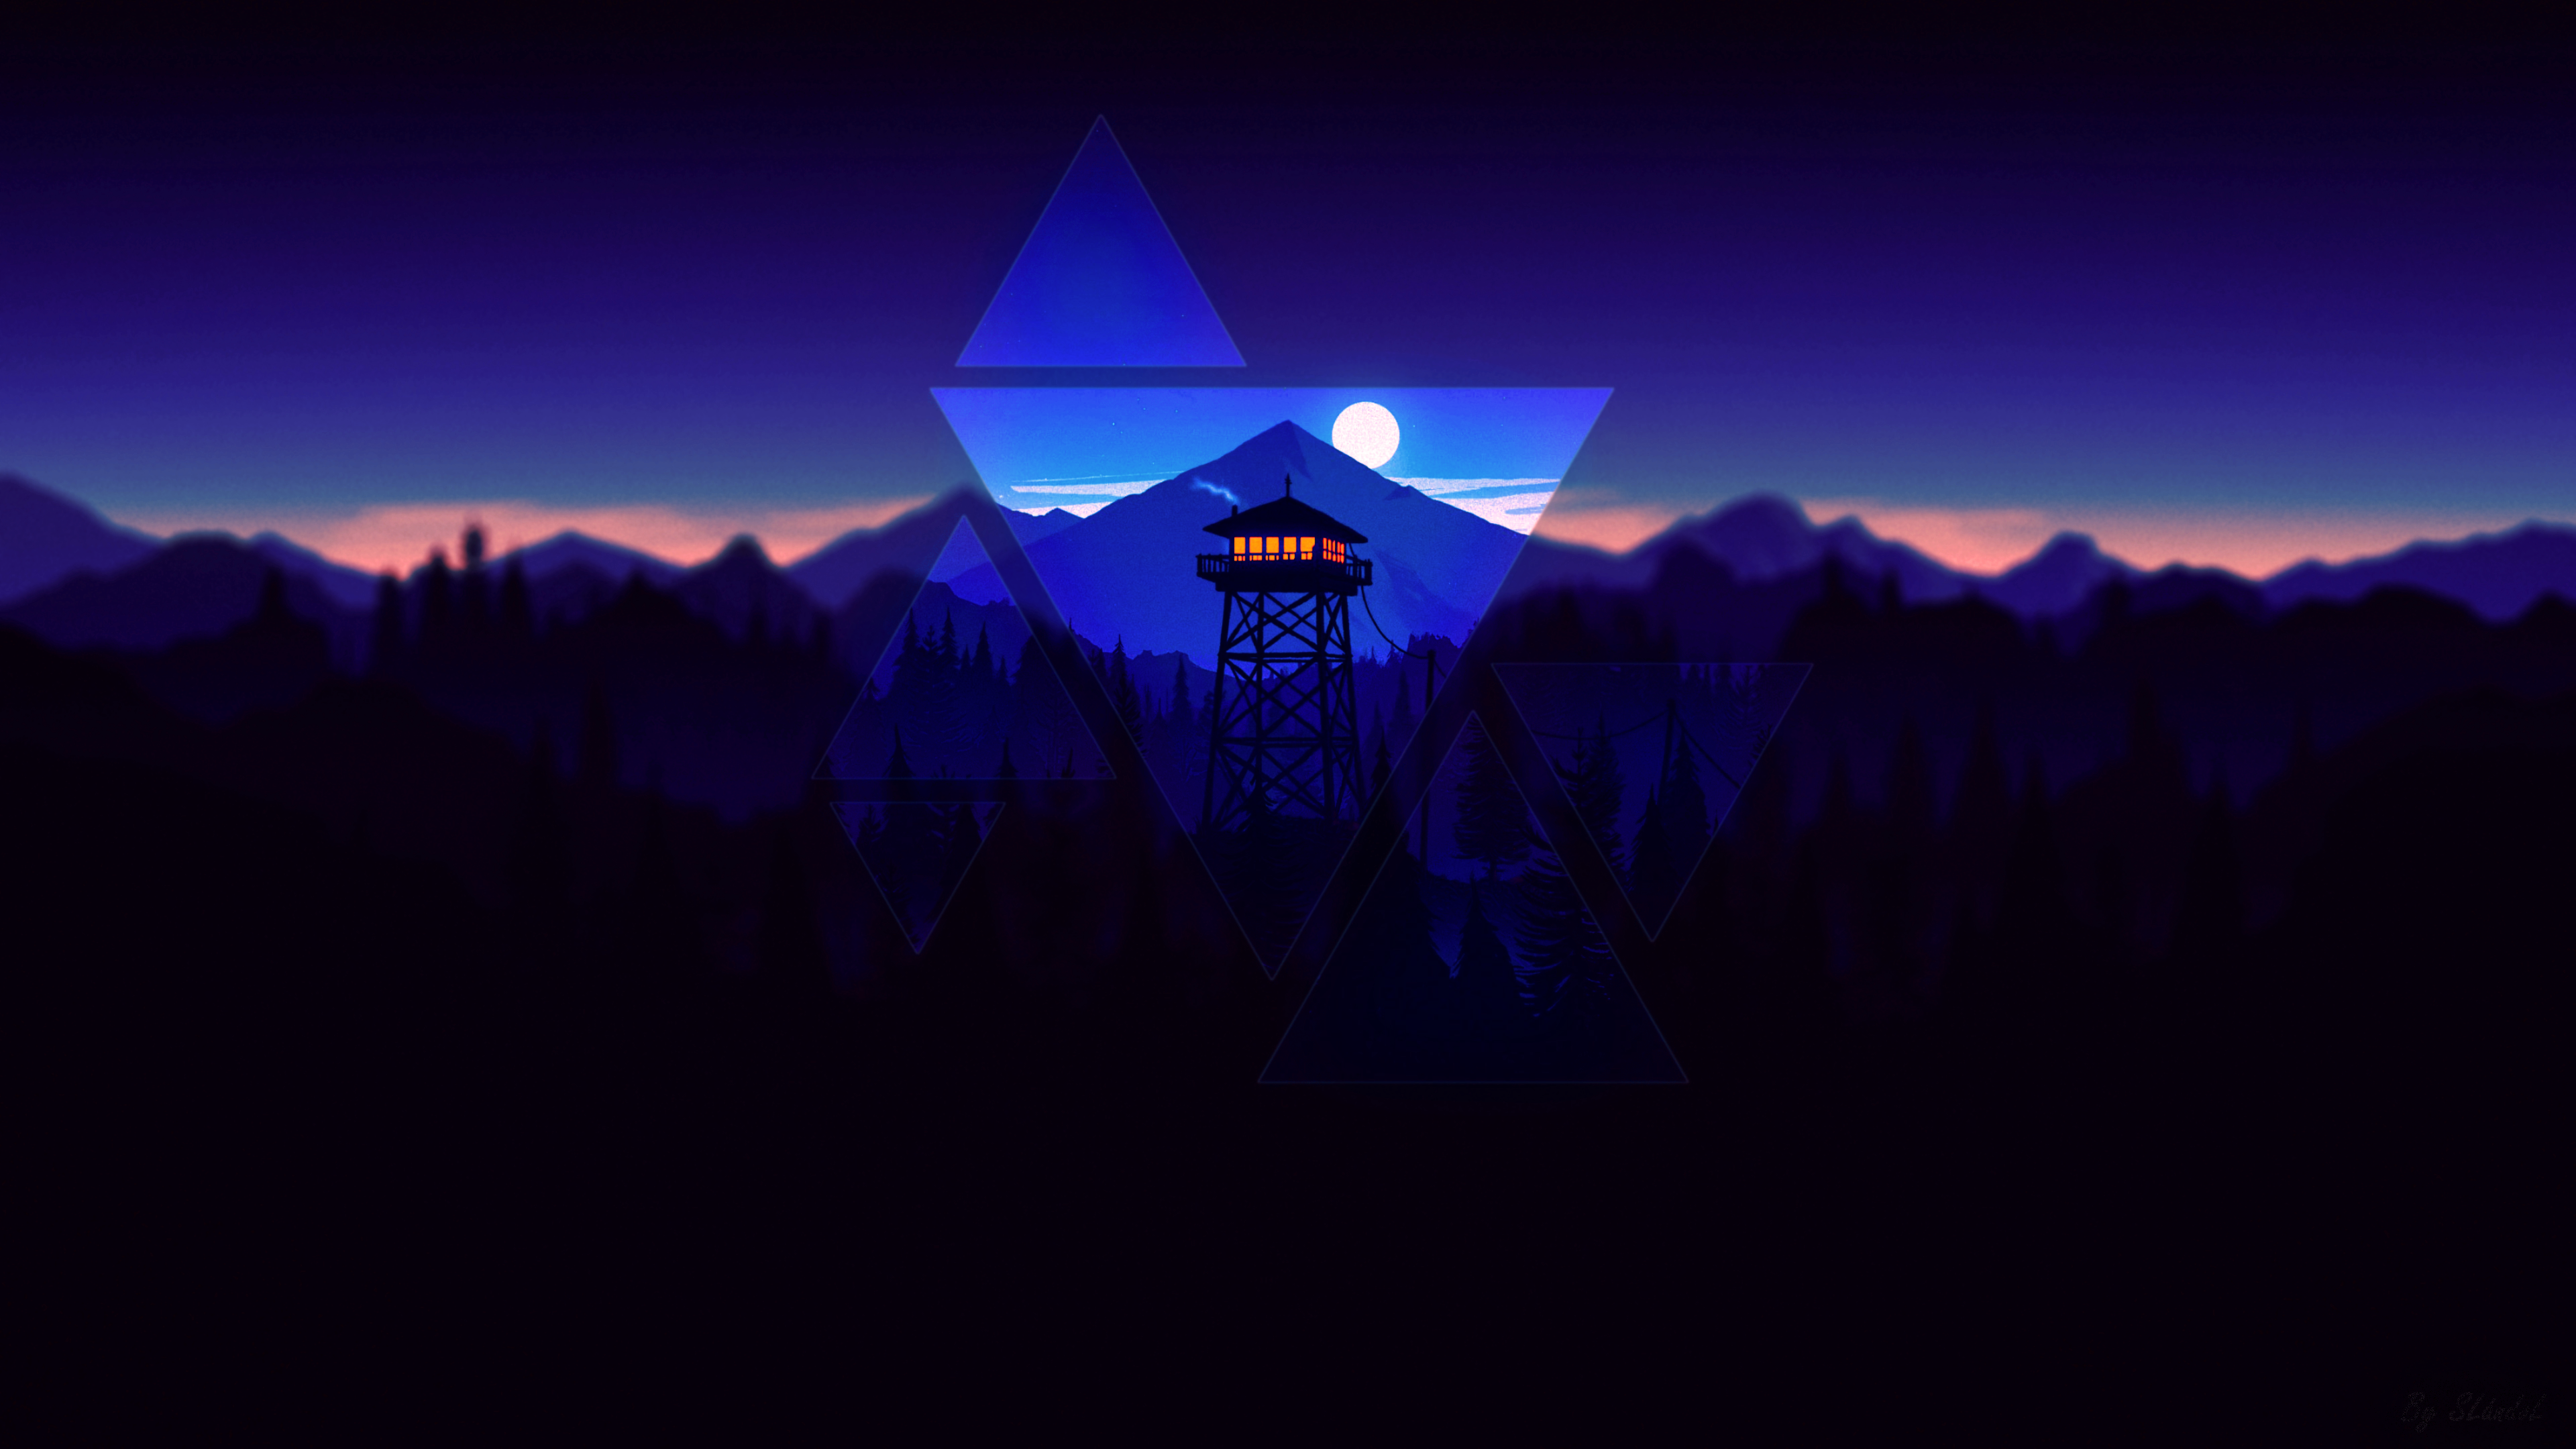 A very dark edited Firewatch wallpaper with triangles [3840x2160]